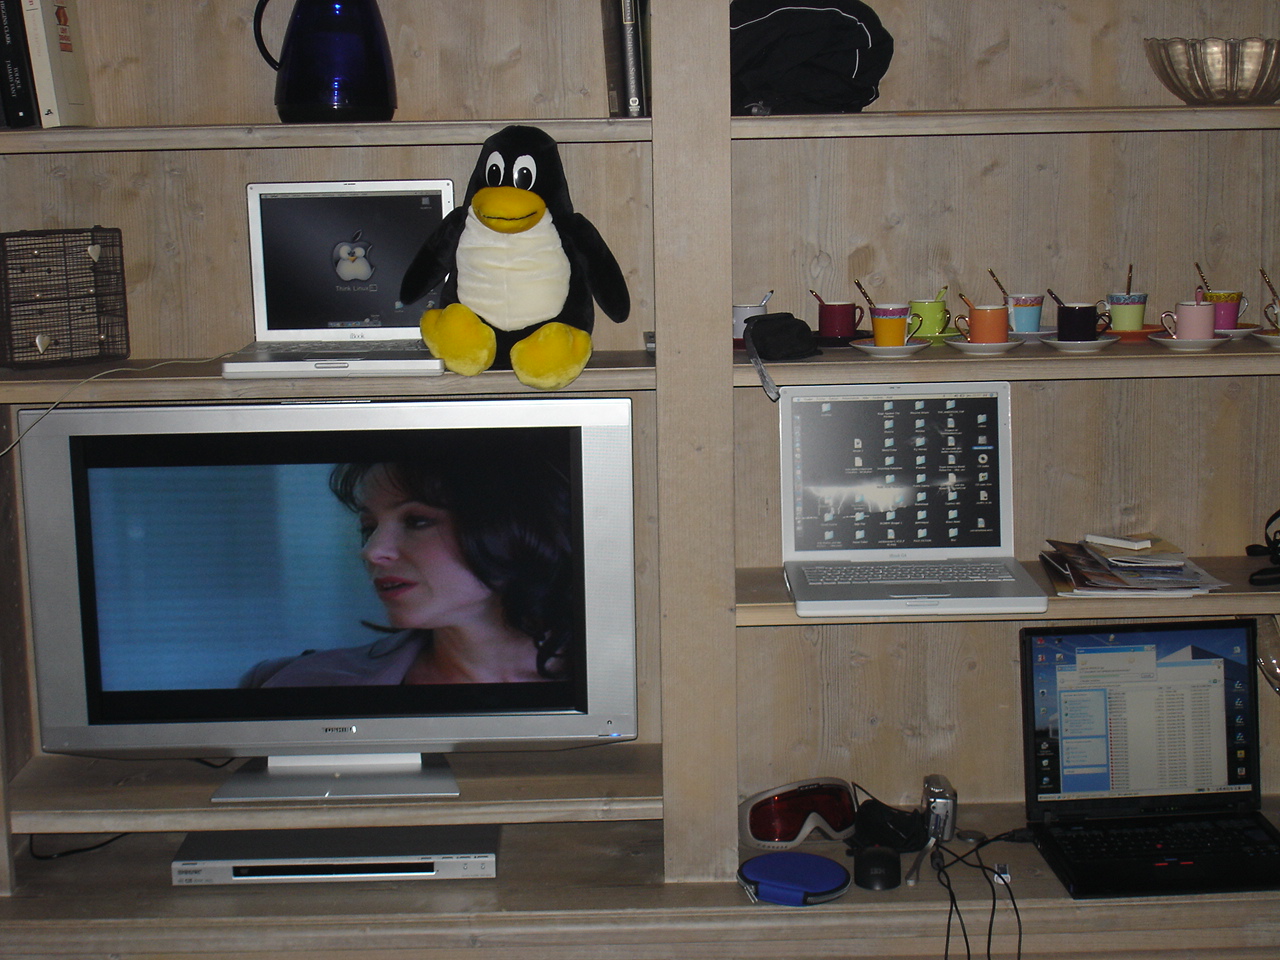 a penguin sitting in front of a television